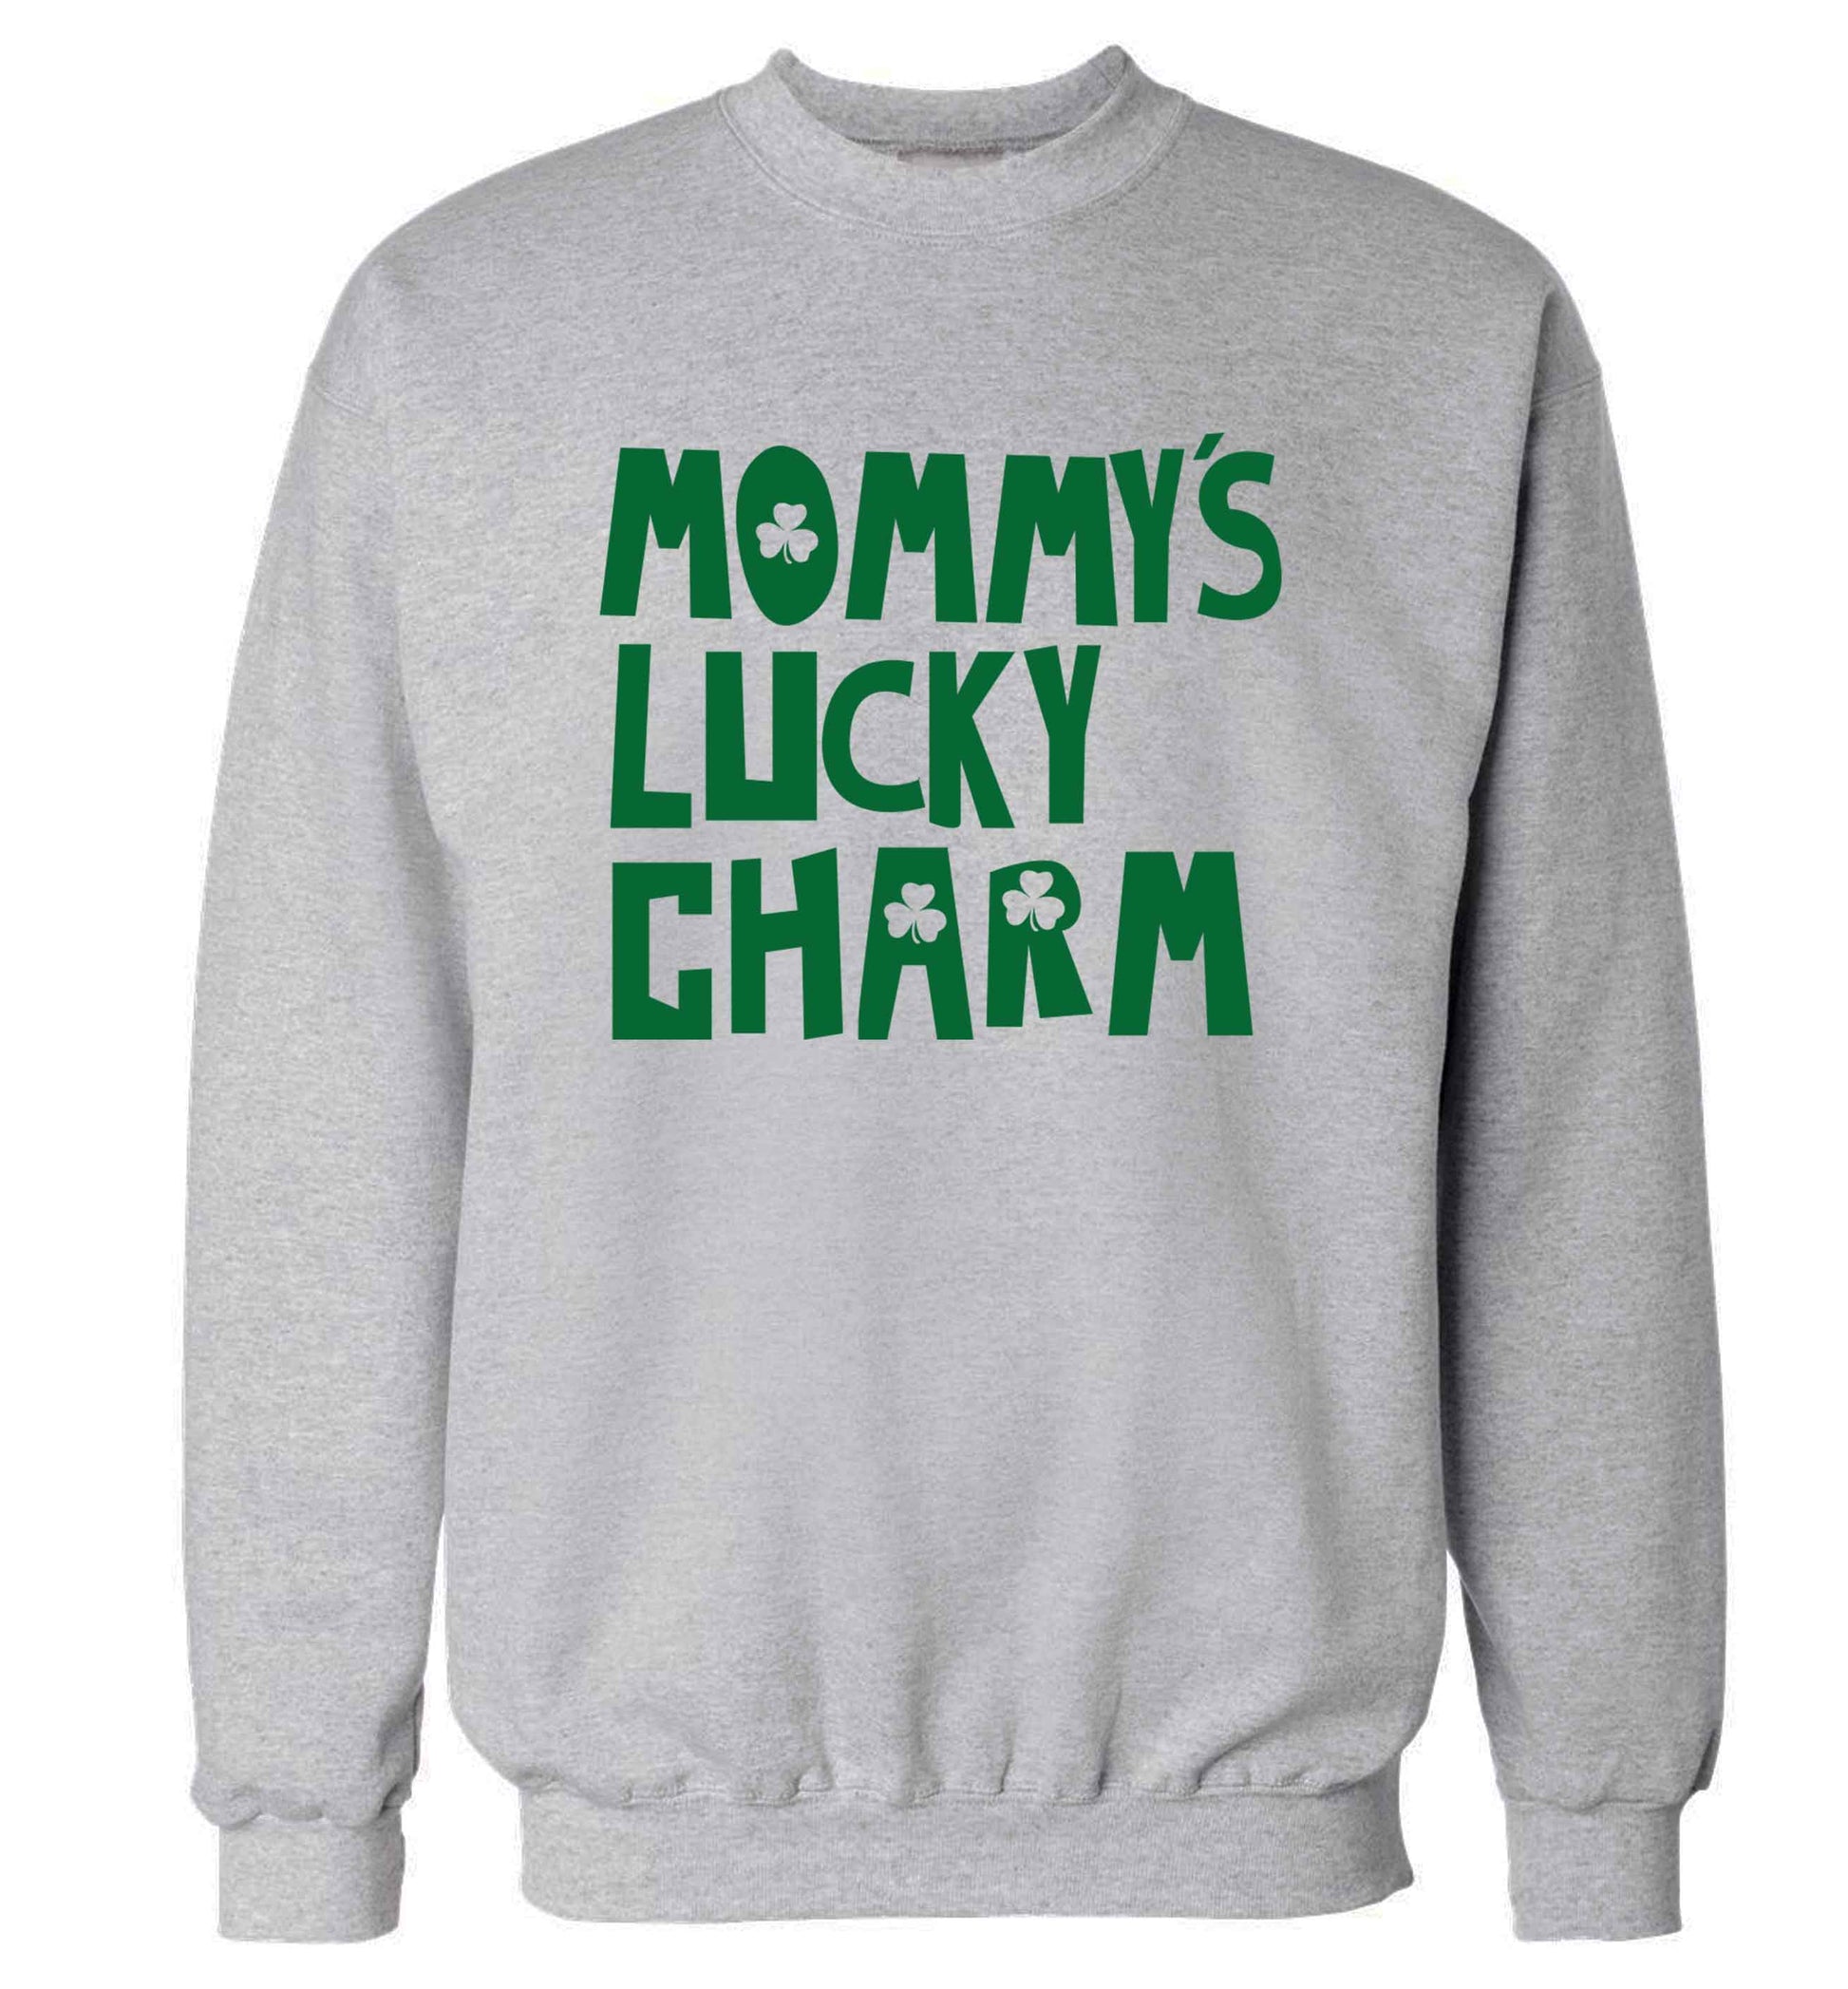 Mommy's lucky charm adult's unisex grey sweater 2XL